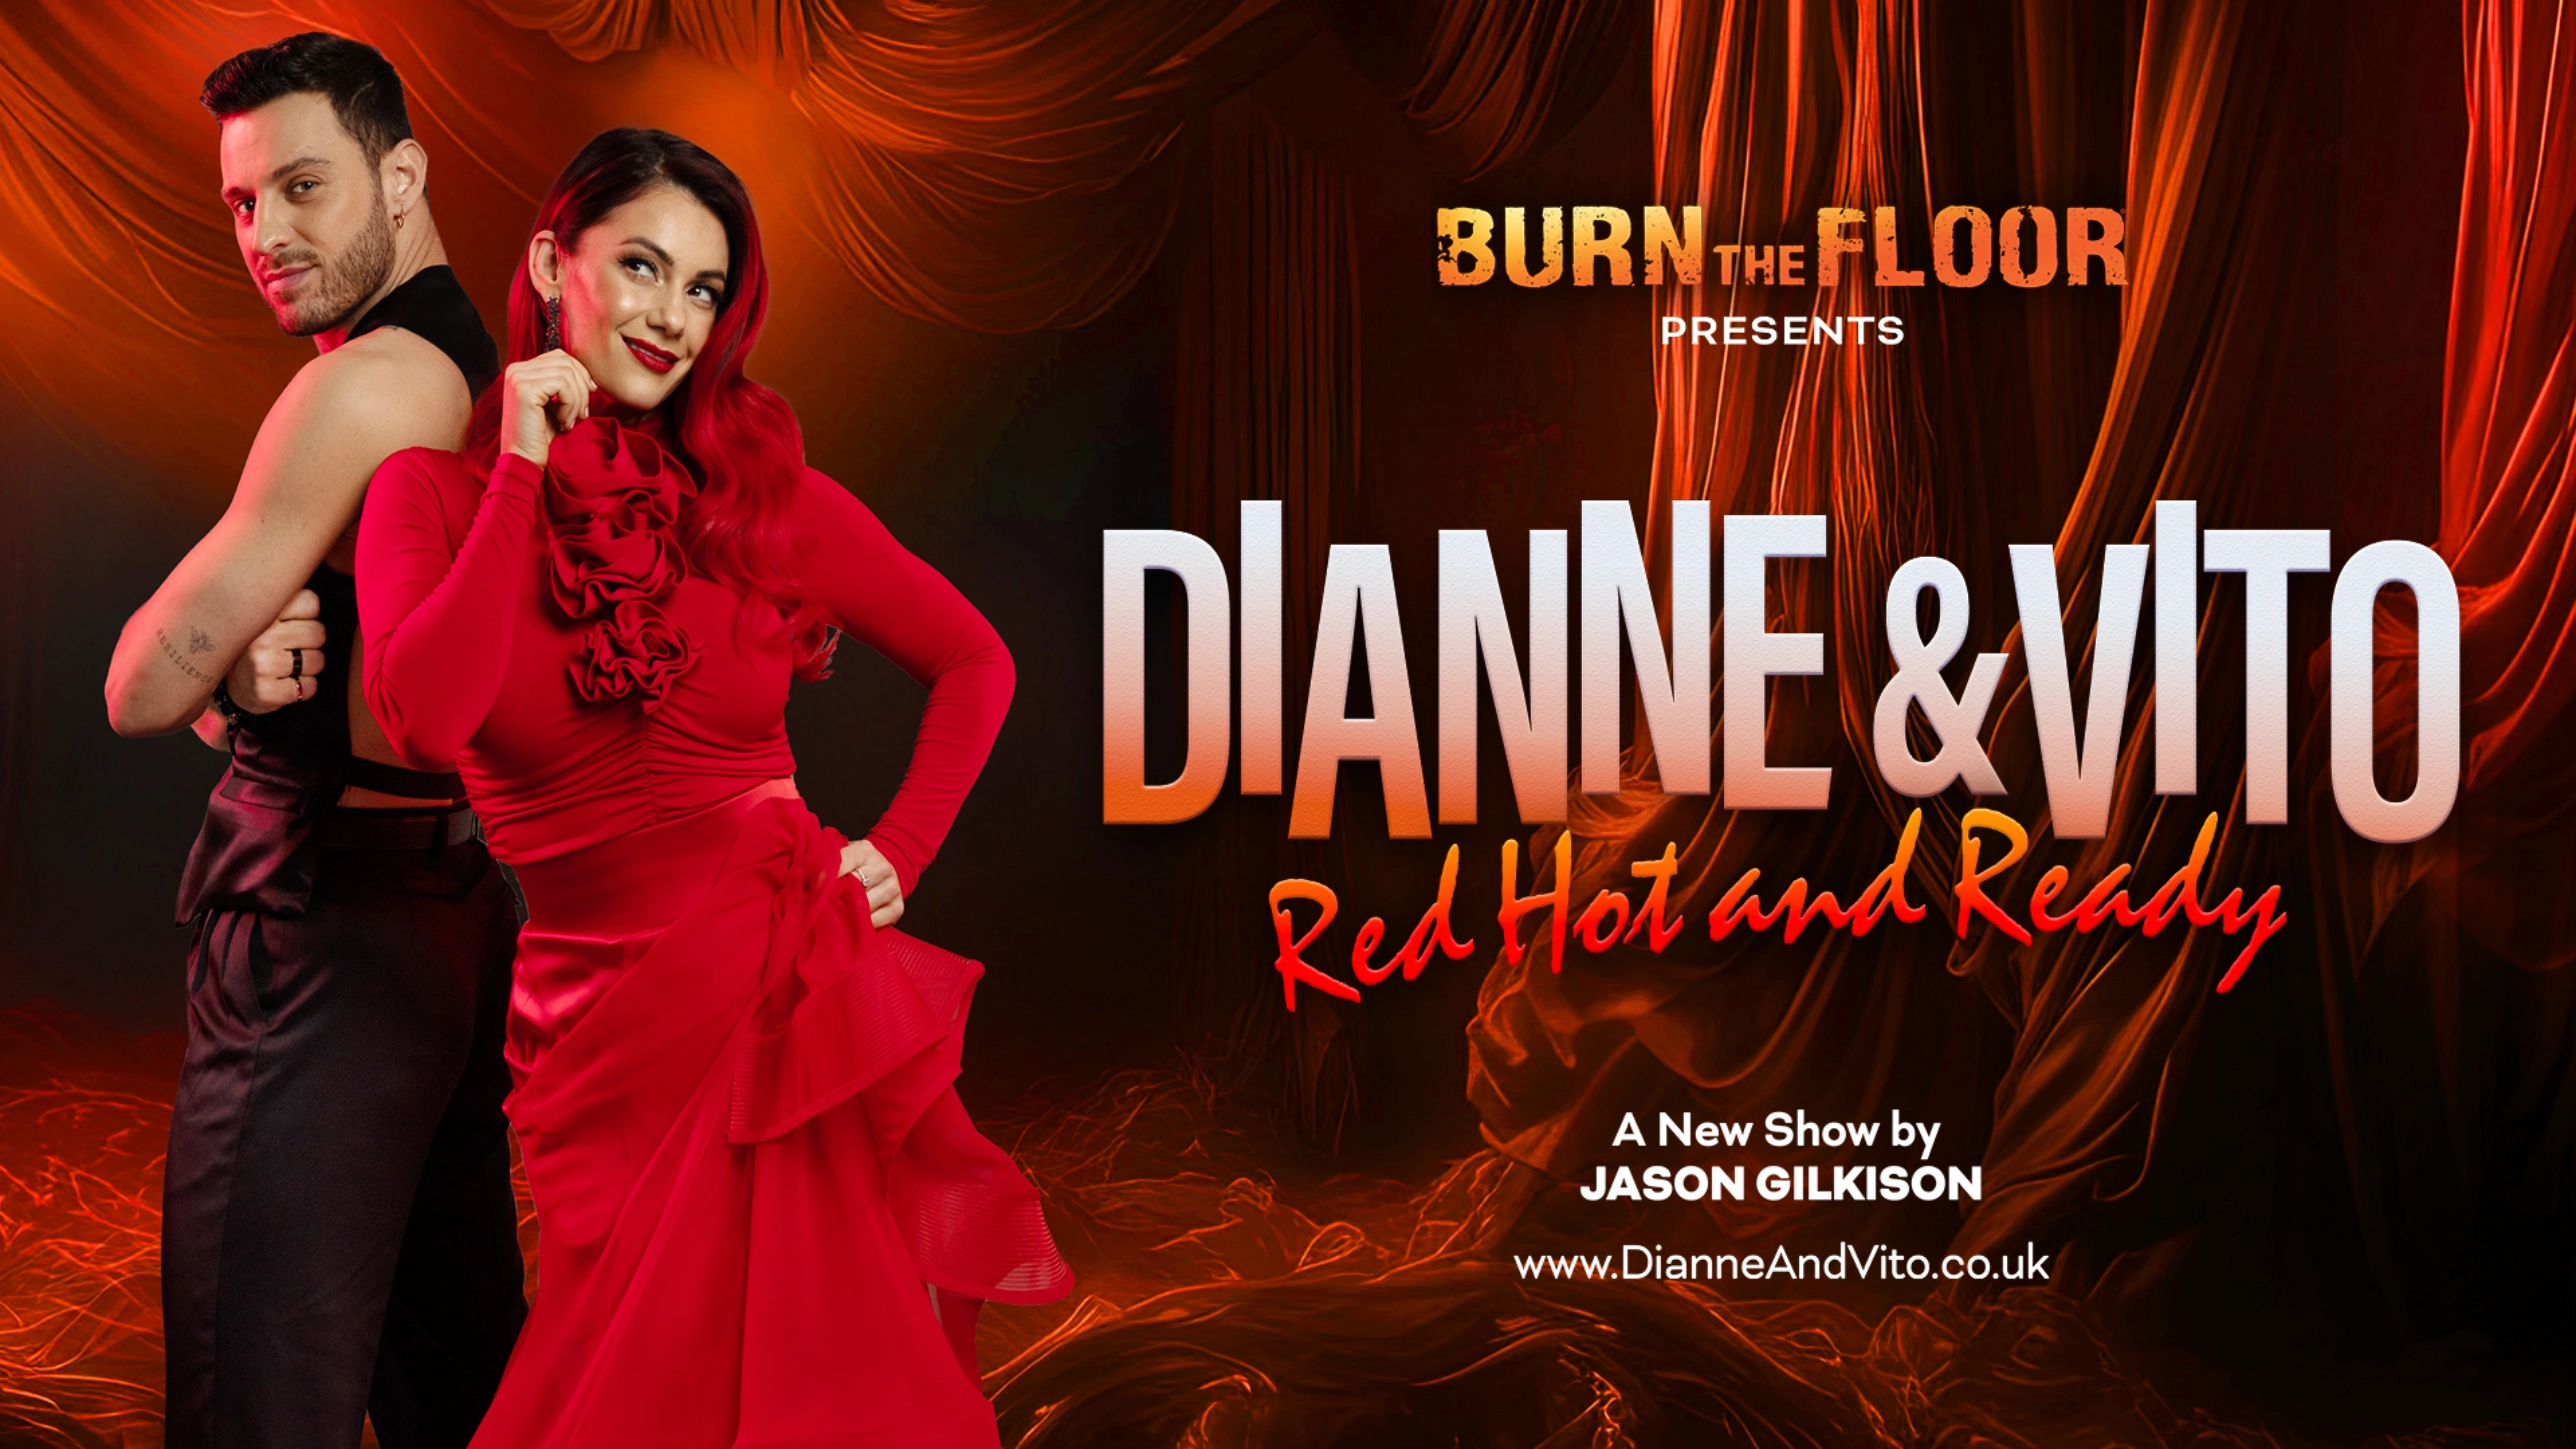 Burn The Floor presents Dianne & Vito: Red Hot & Ready